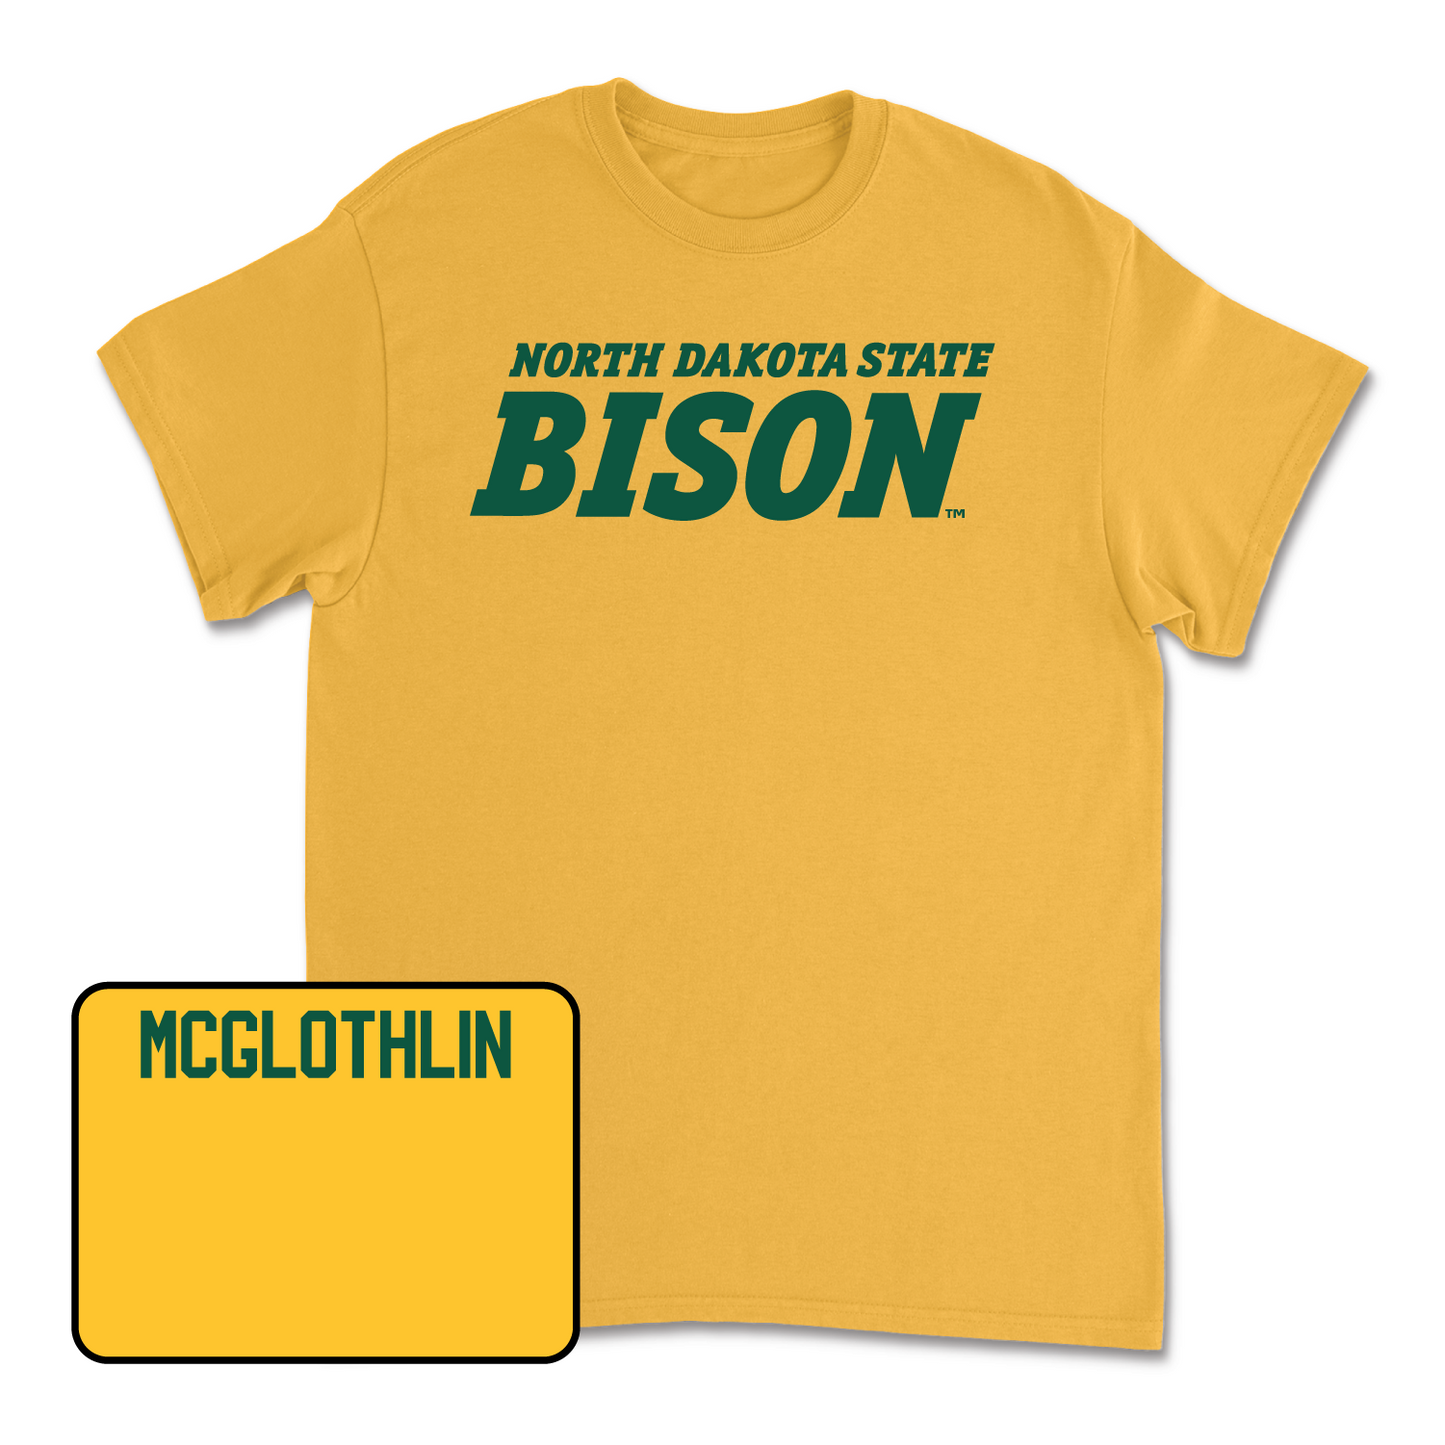 Gold Track & Field Bison Tee Small / Dylan McGlothlin